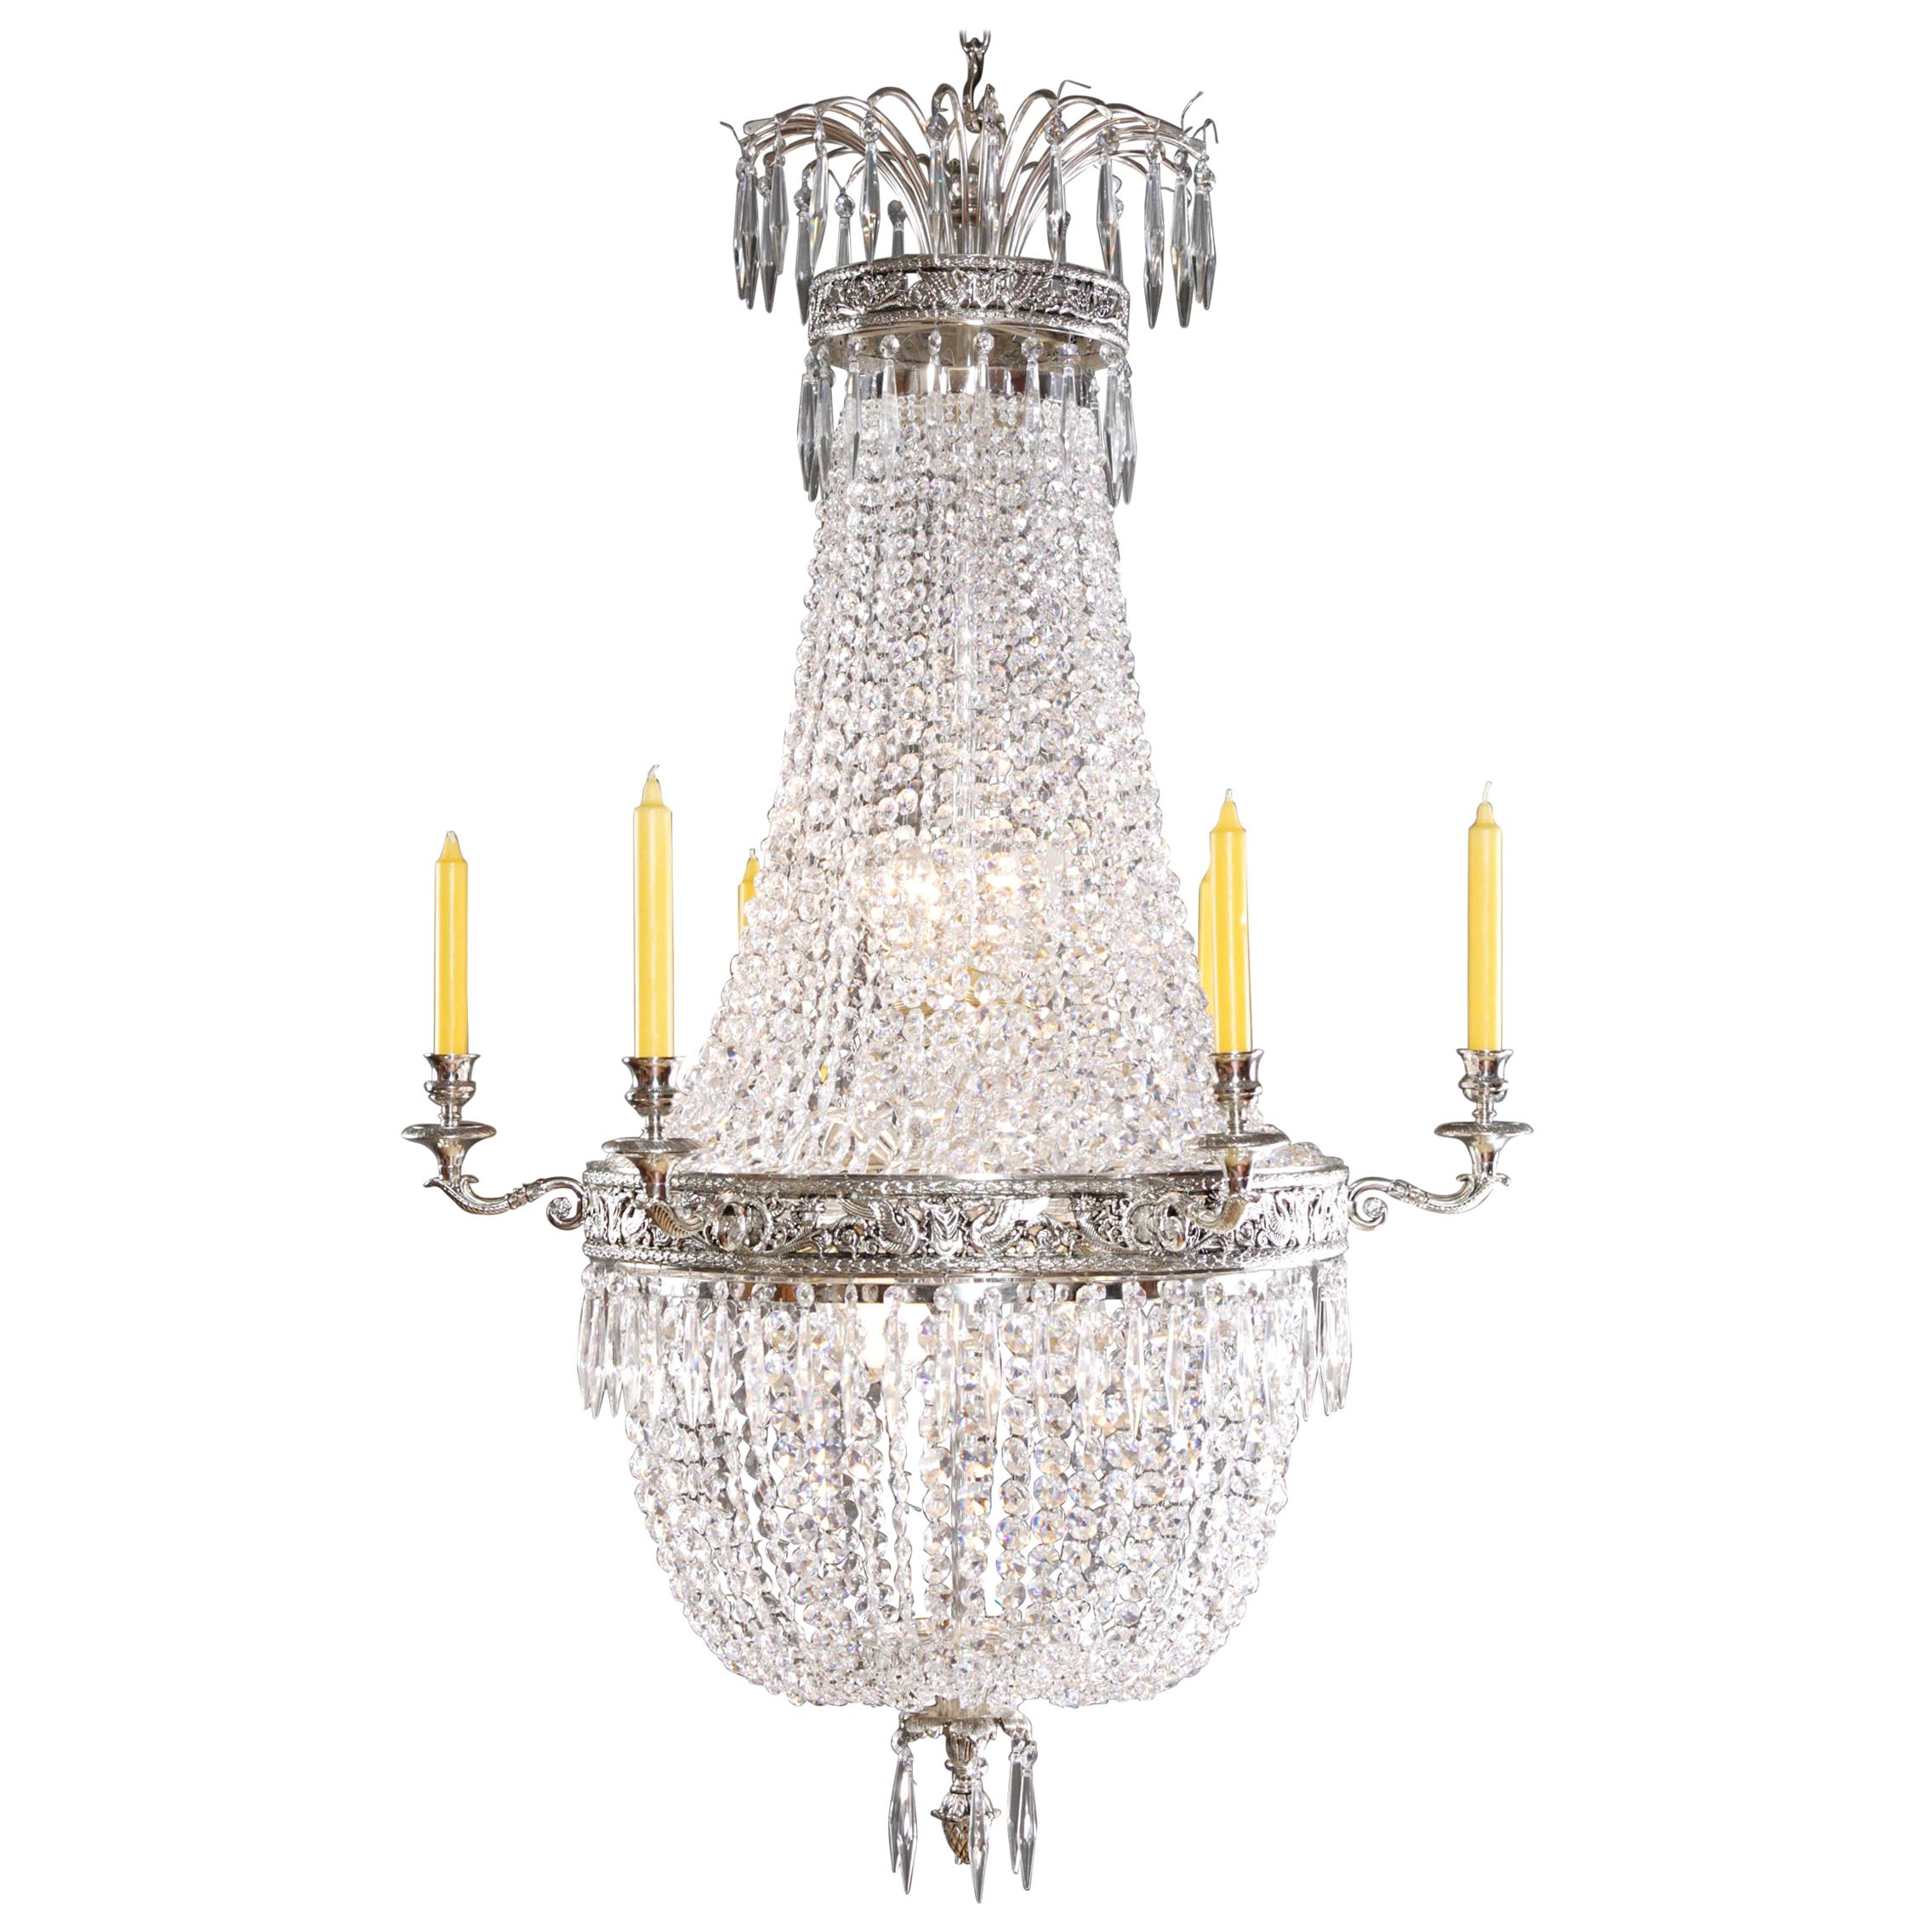 20th Century Empire Style Basket Chandelier For Sale